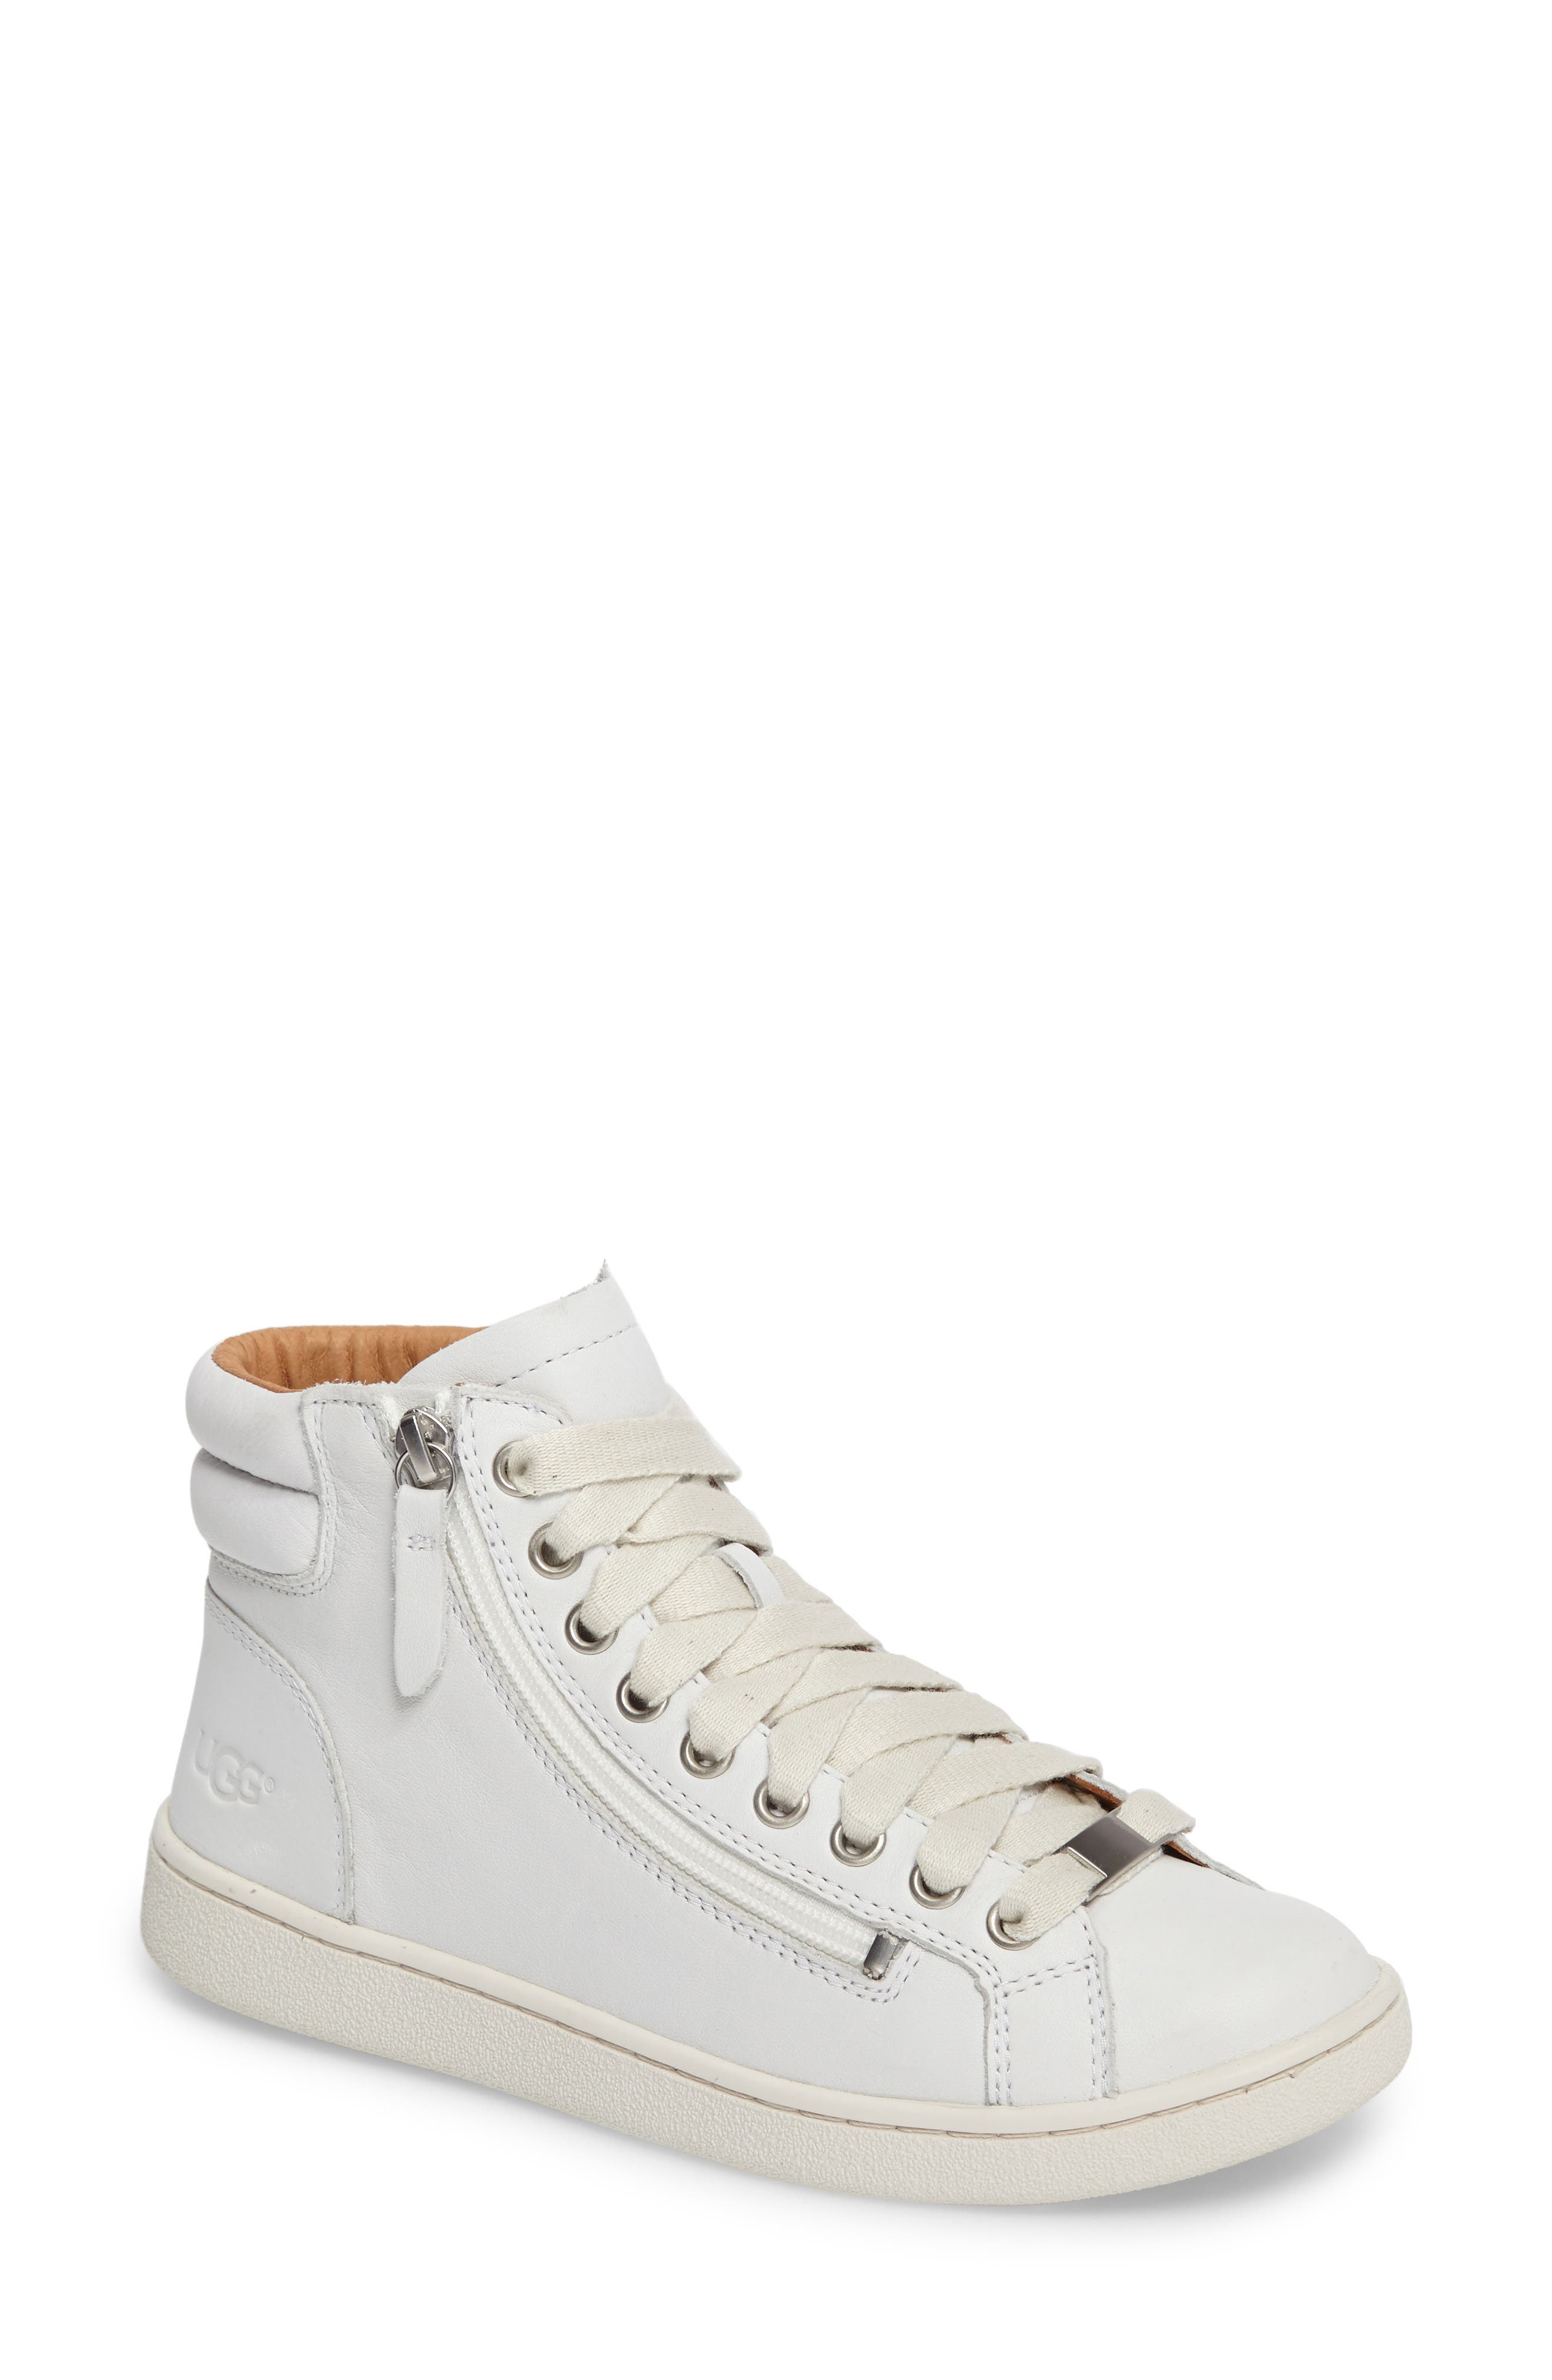 Ugg Olive High Top Sneaker In Wht